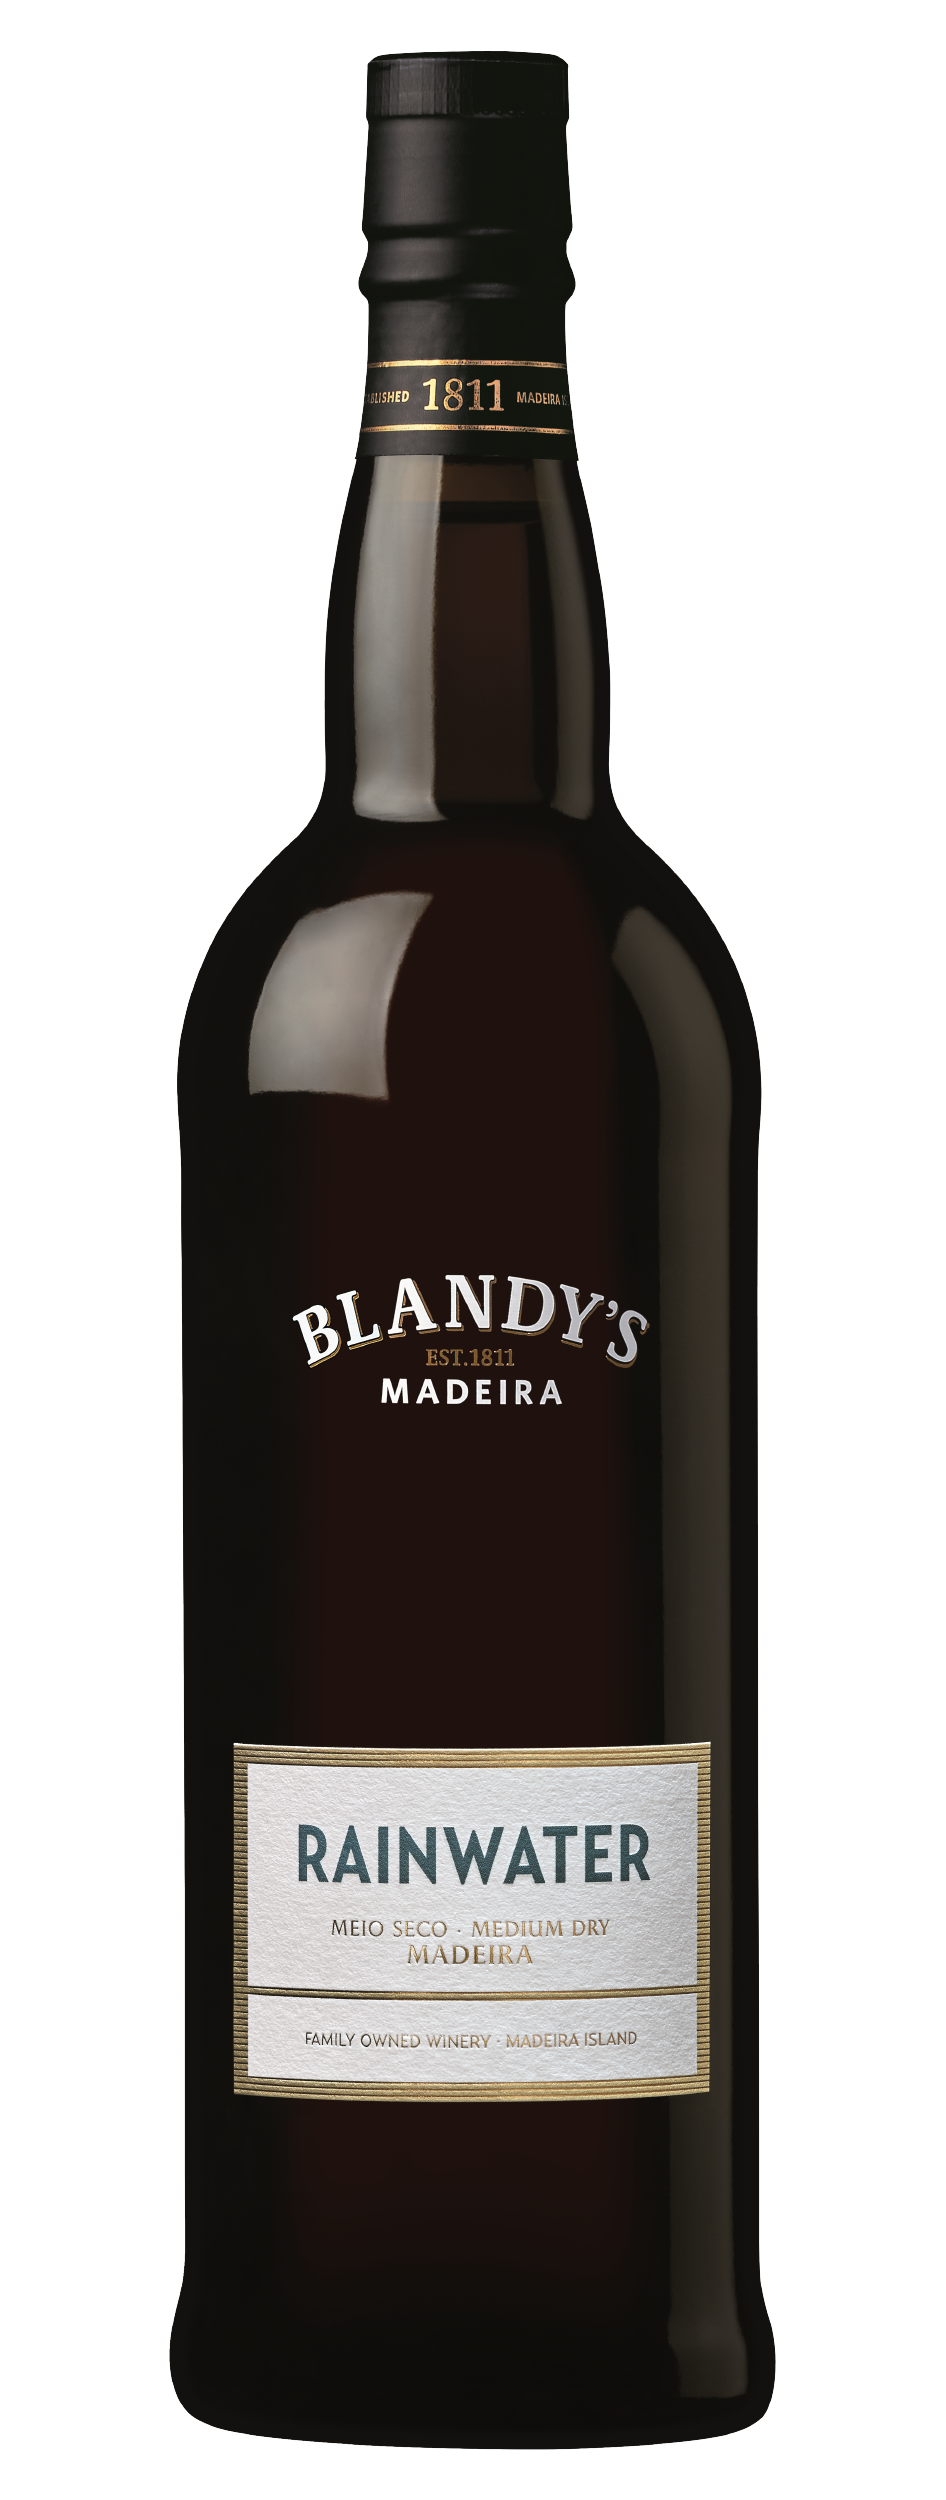 Product Image for BLANDY'S RAINWATER